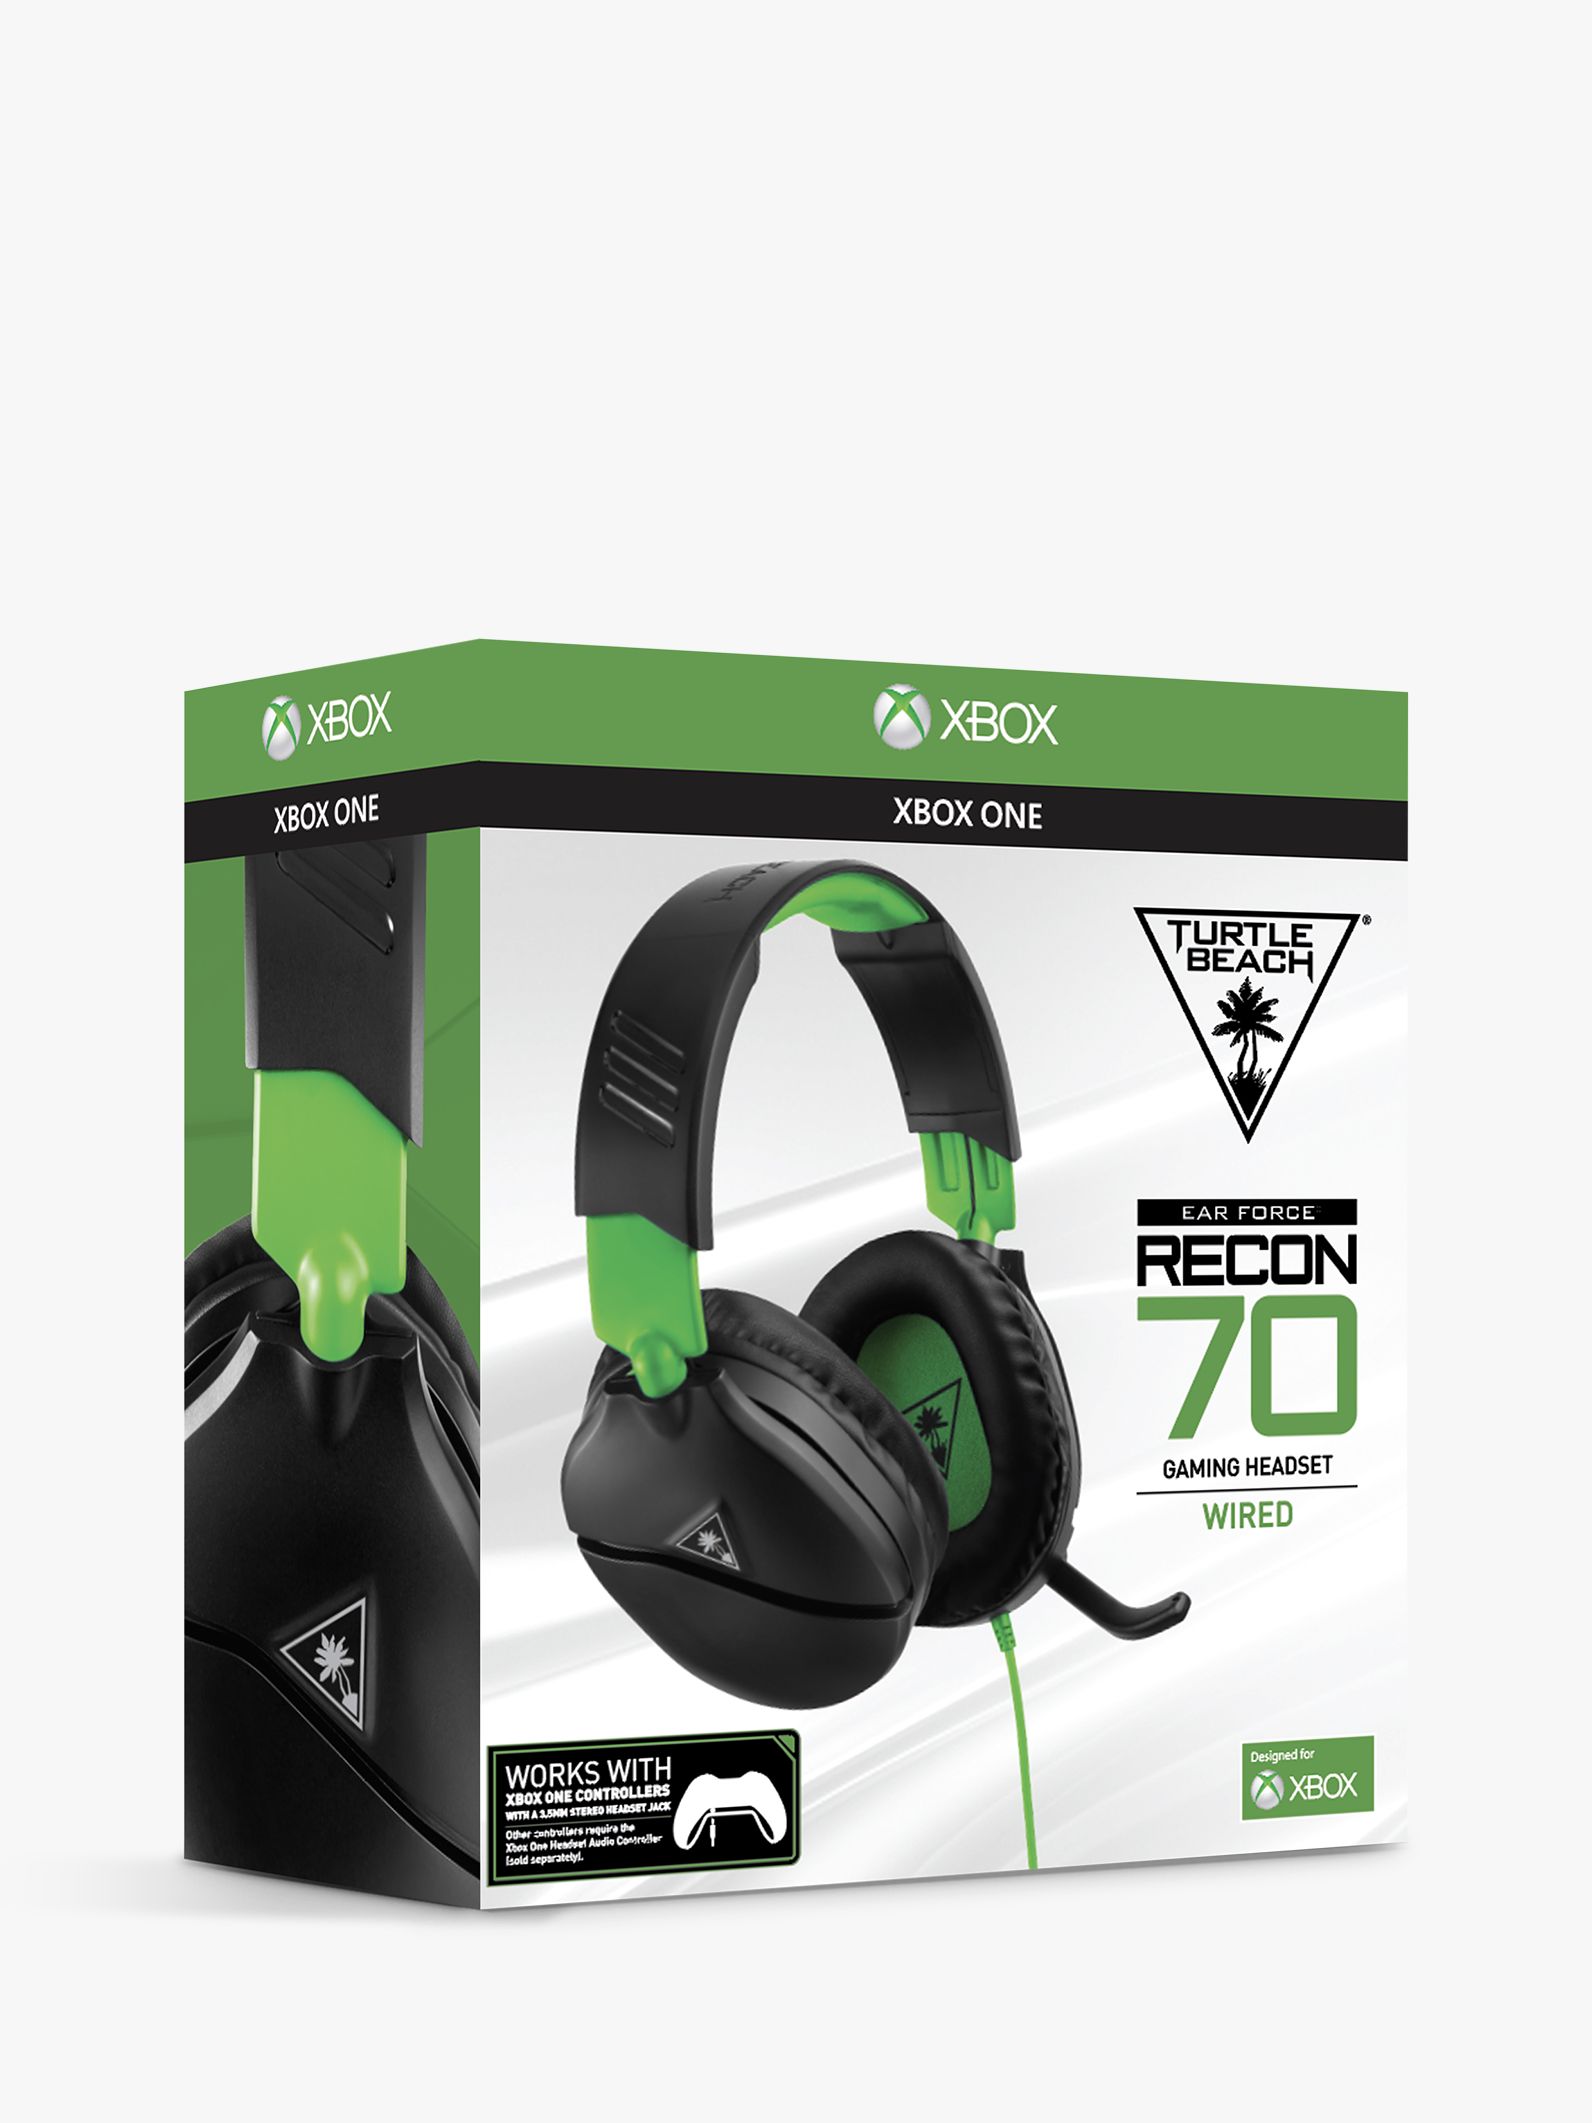 turtle beach xbox wired headset